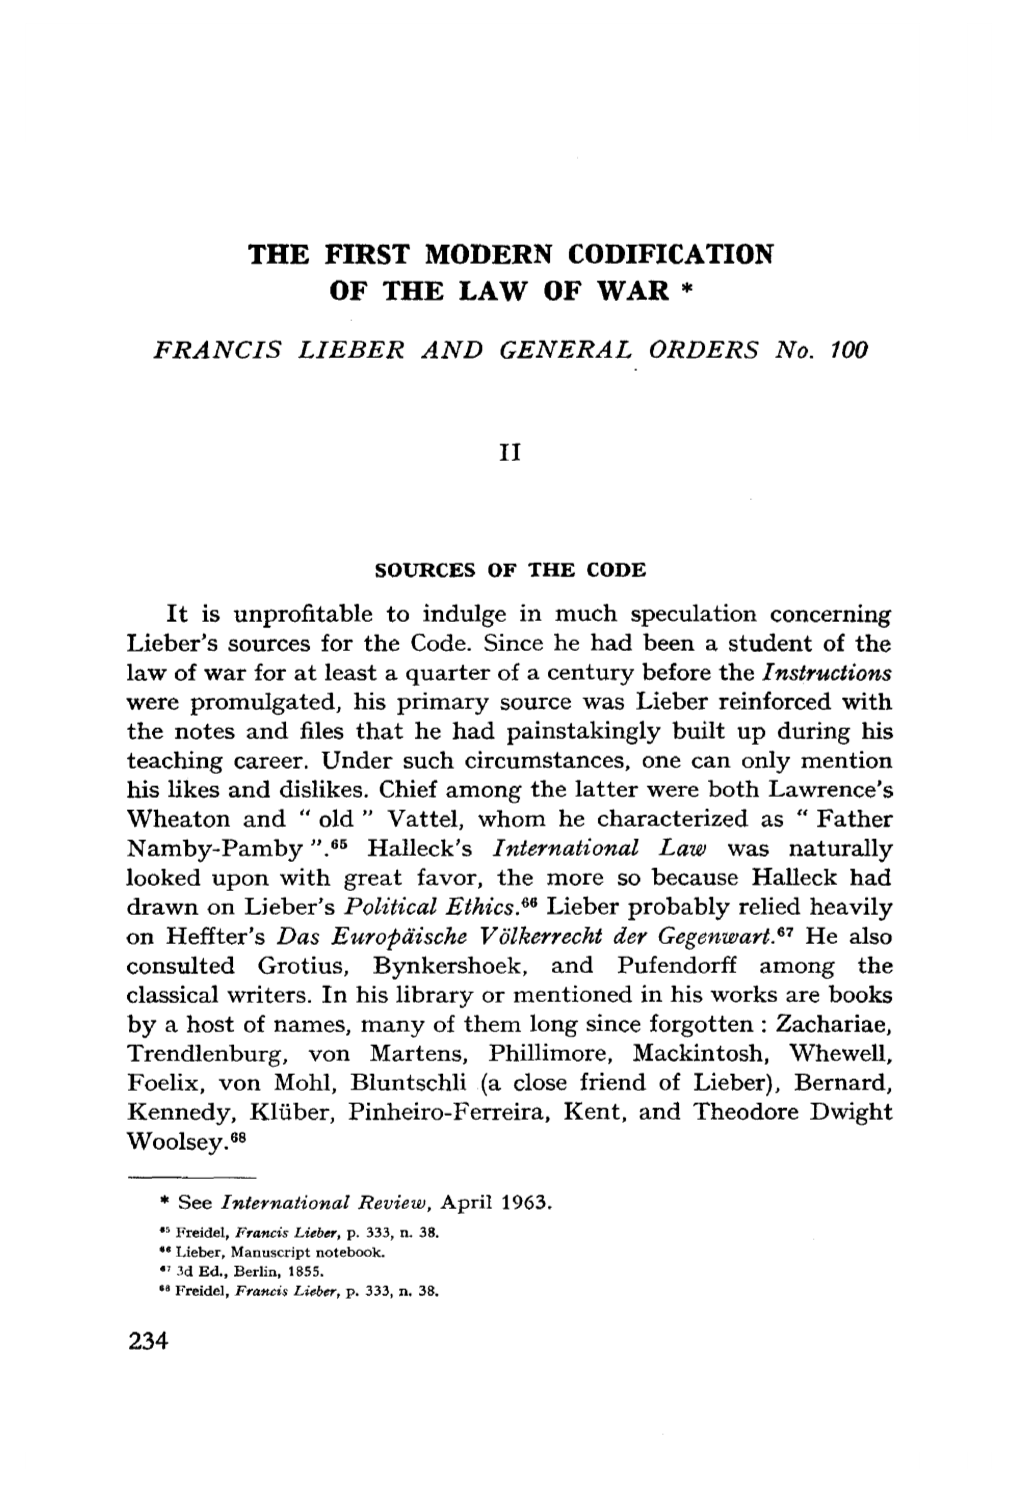 THE FIRST MODERN CODIFICATION of the LAW of WAR * FRANCIS LIEBER and GENERAL ORDERS No